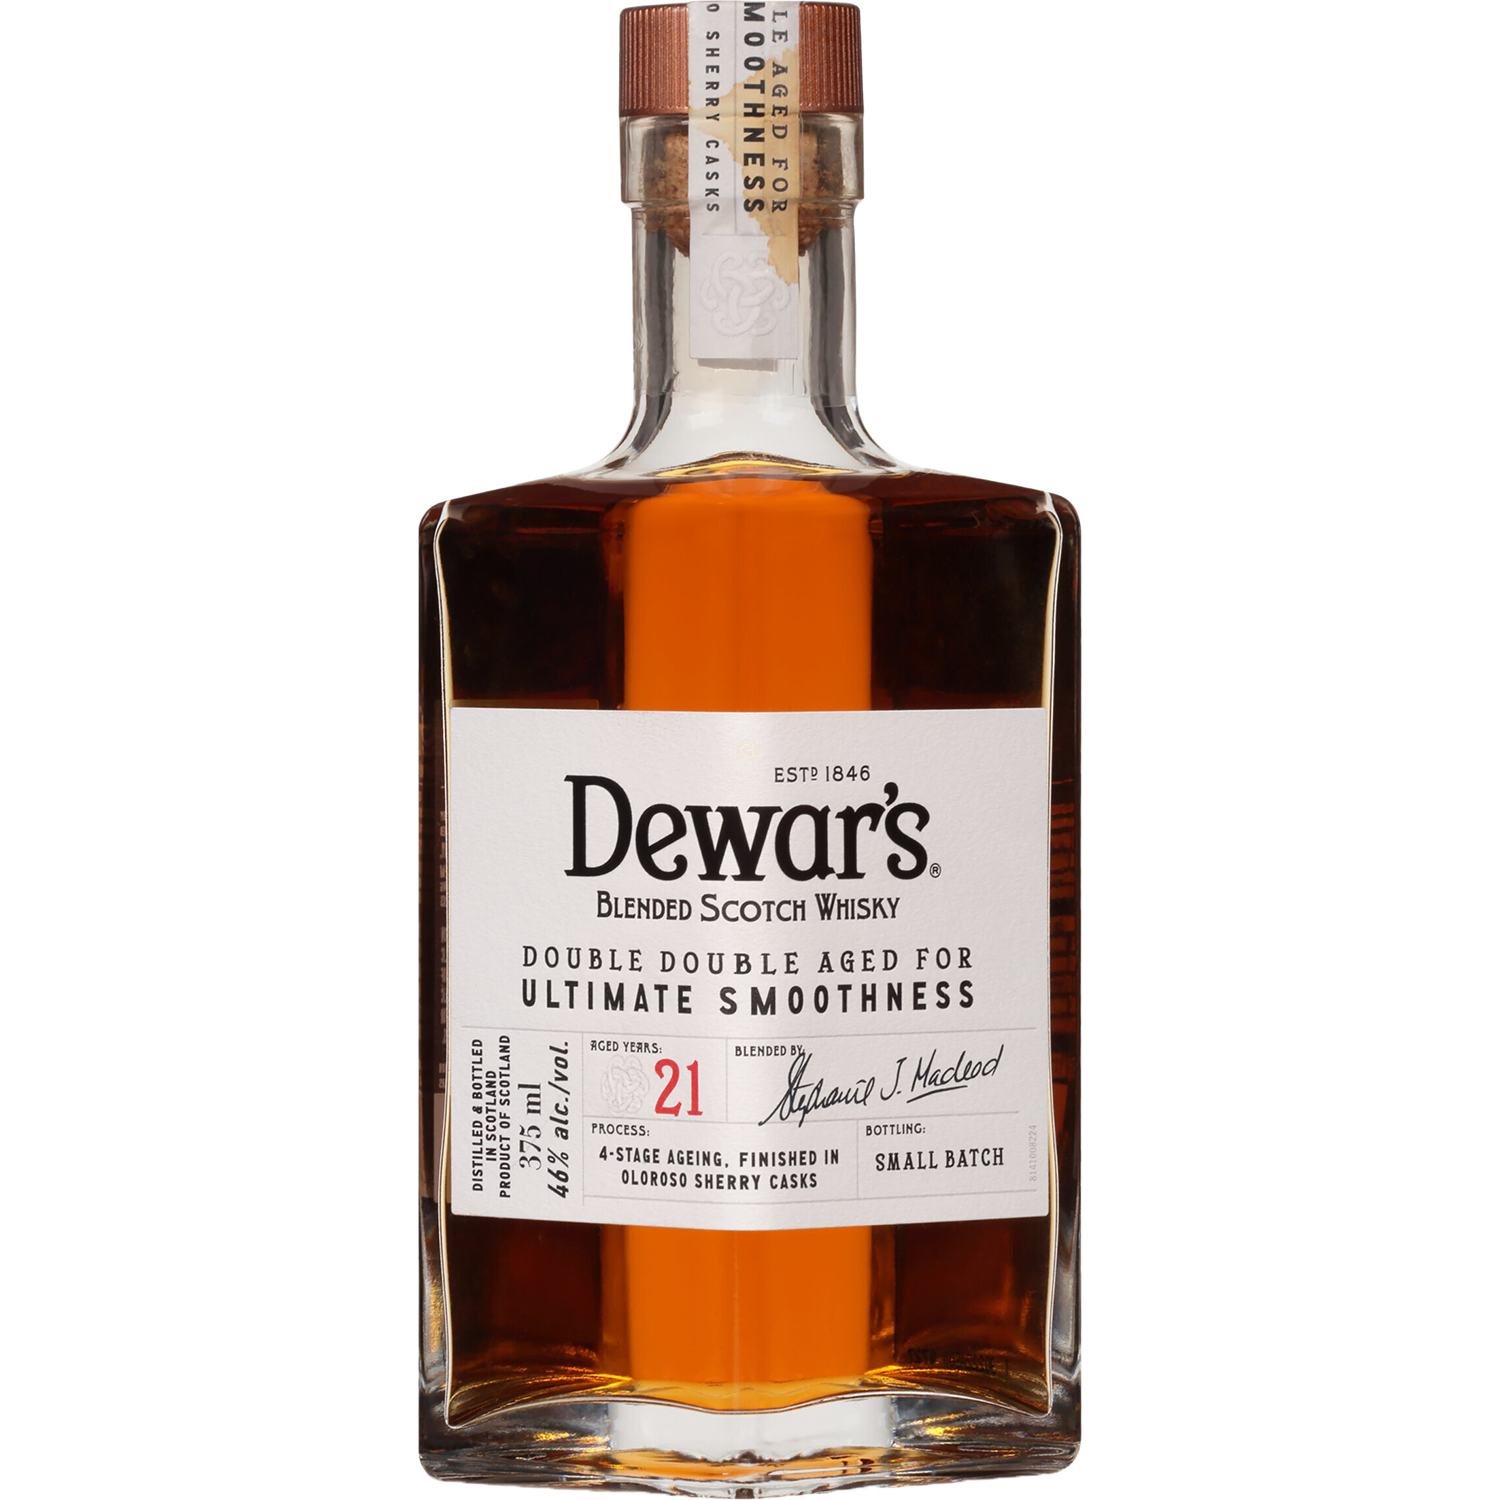 Dewar's Double Double Aged 21 Year Small Batch Blended Scotch